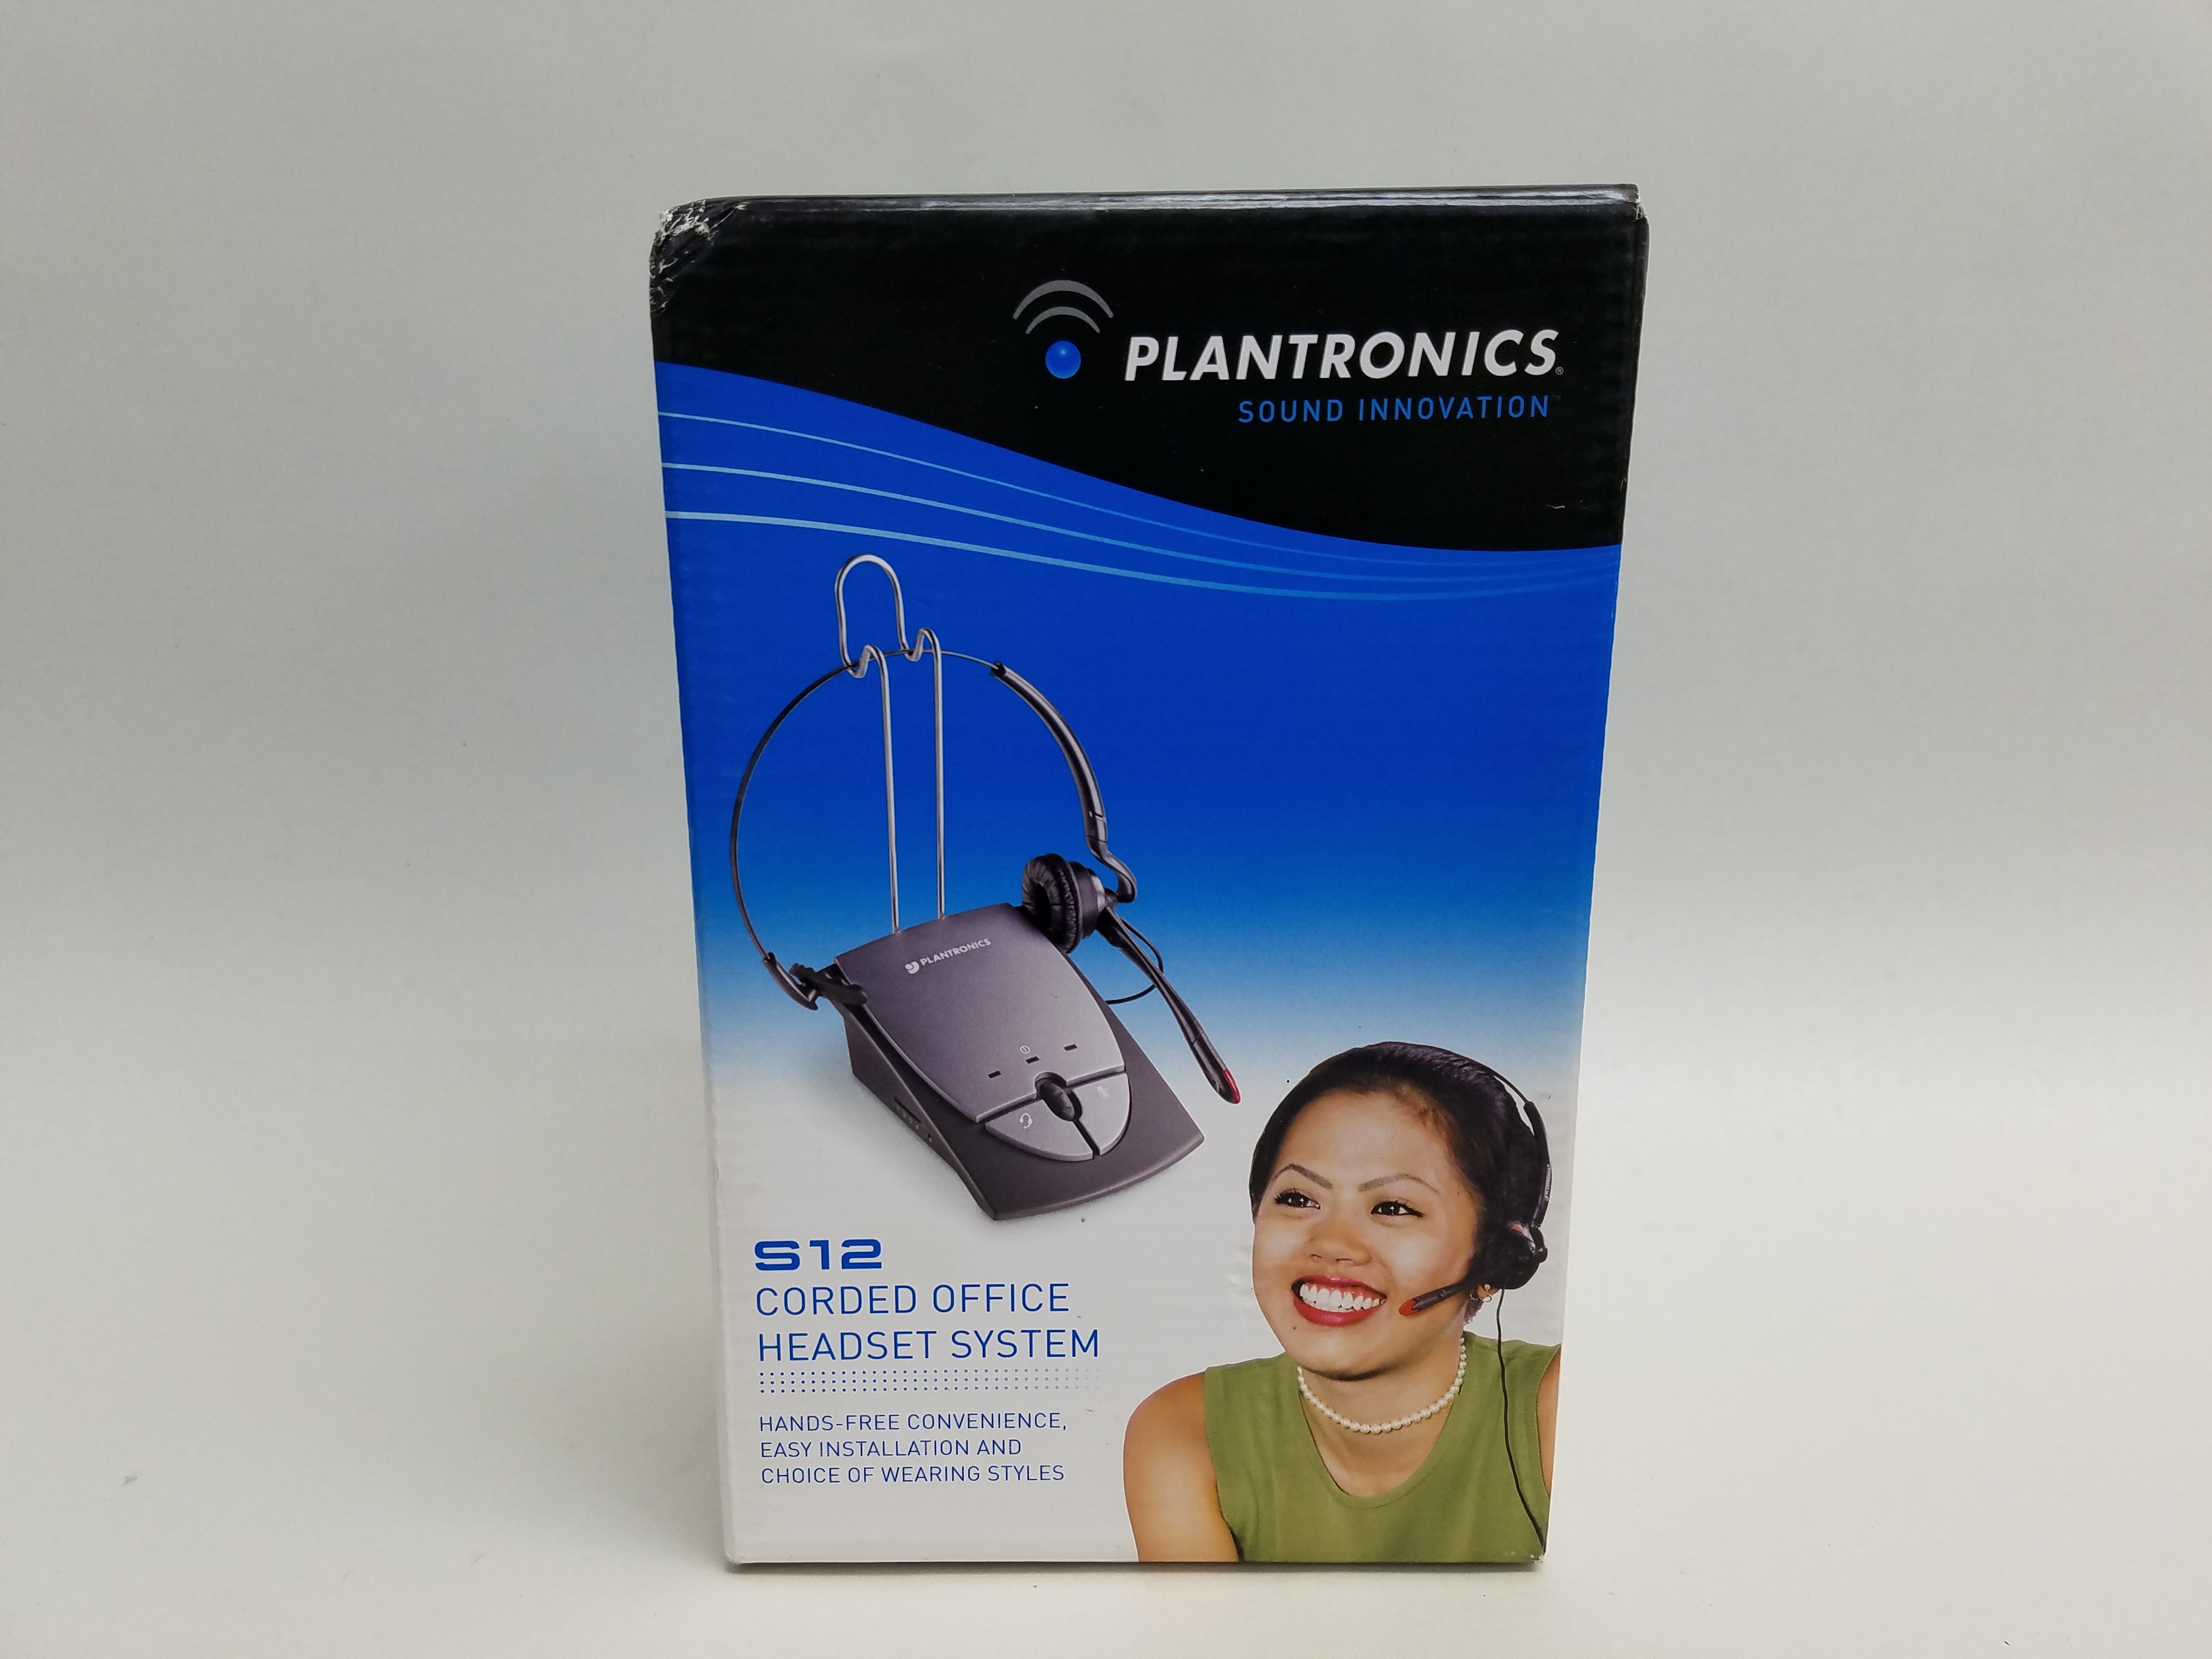 Used New Plantronics S12 Telephone Headset System Hands Free 2 In 1 Headset - image 1 of 4